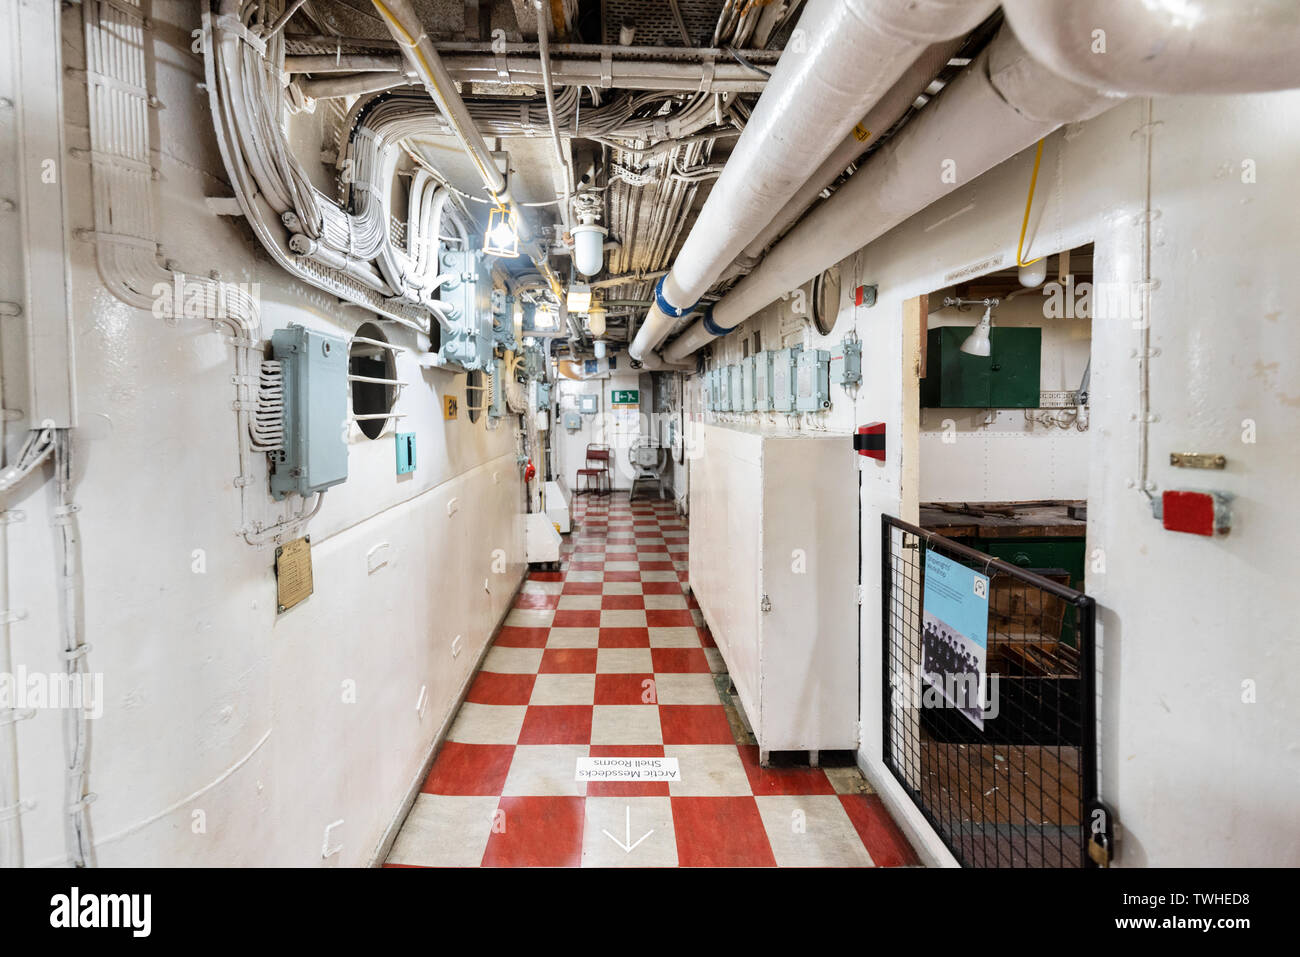 London, United Kingdom - May 13, 2019: HMS Belfast warship museum interior, saw action during the second world war, is now permanently moored as a museum ship on the River Thames in London . Stock Photo